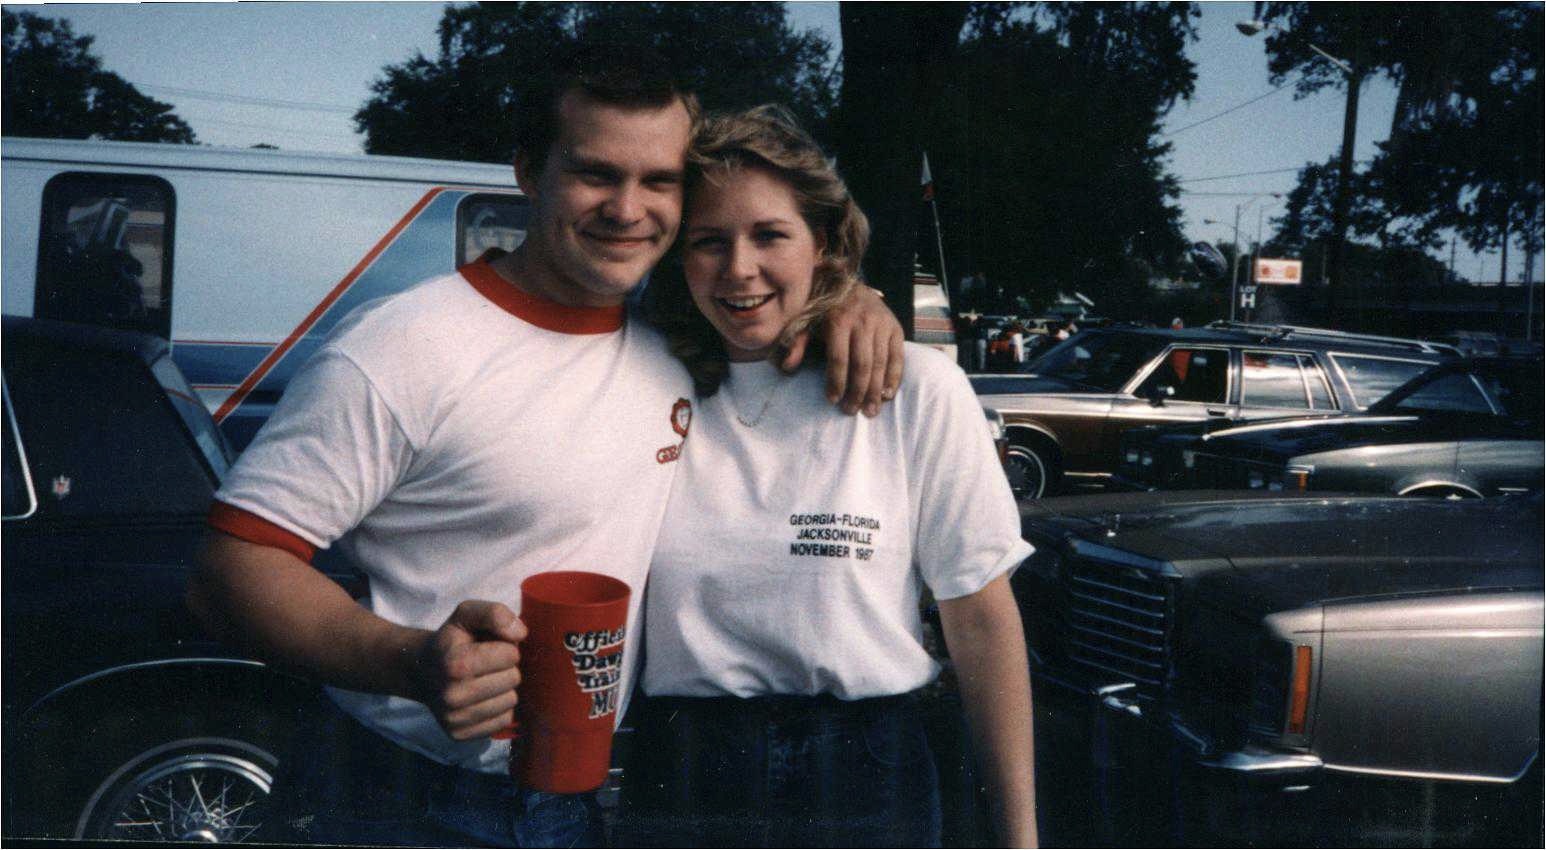 Brent and Kelly in 1987, just before that year's Georgia-Florida game.